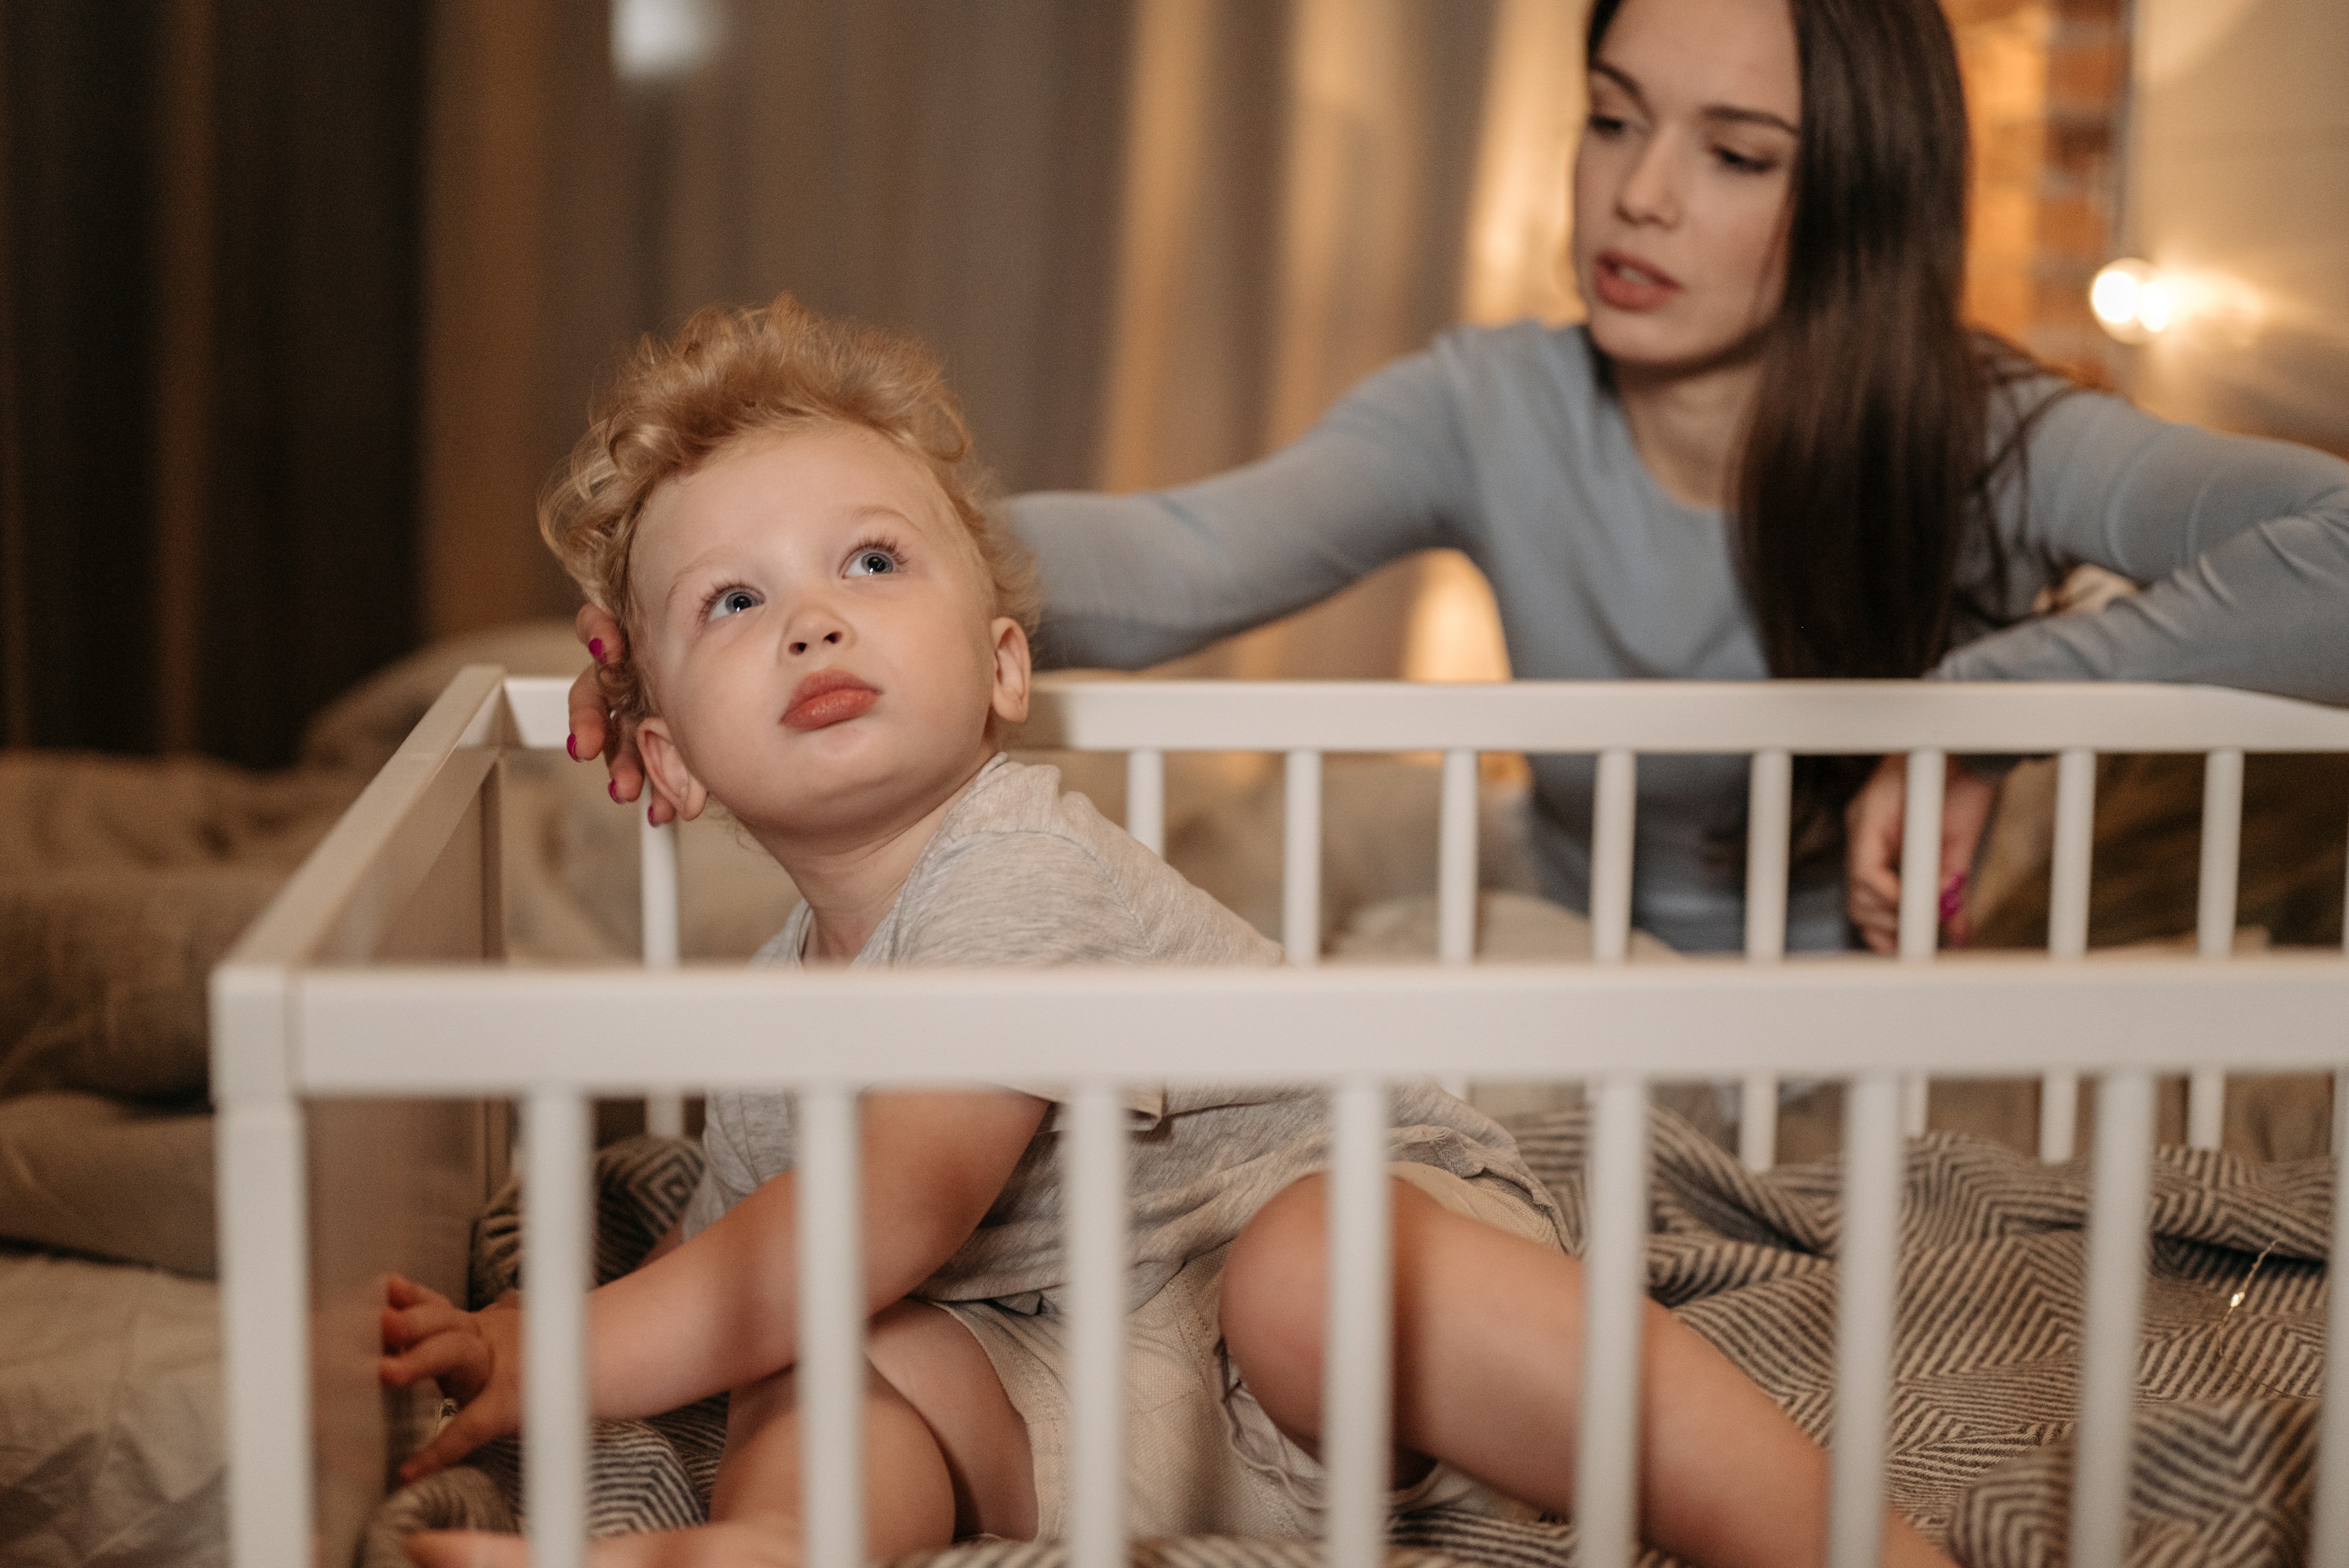 OP checked on her son every three minutes | Photo: Pexels